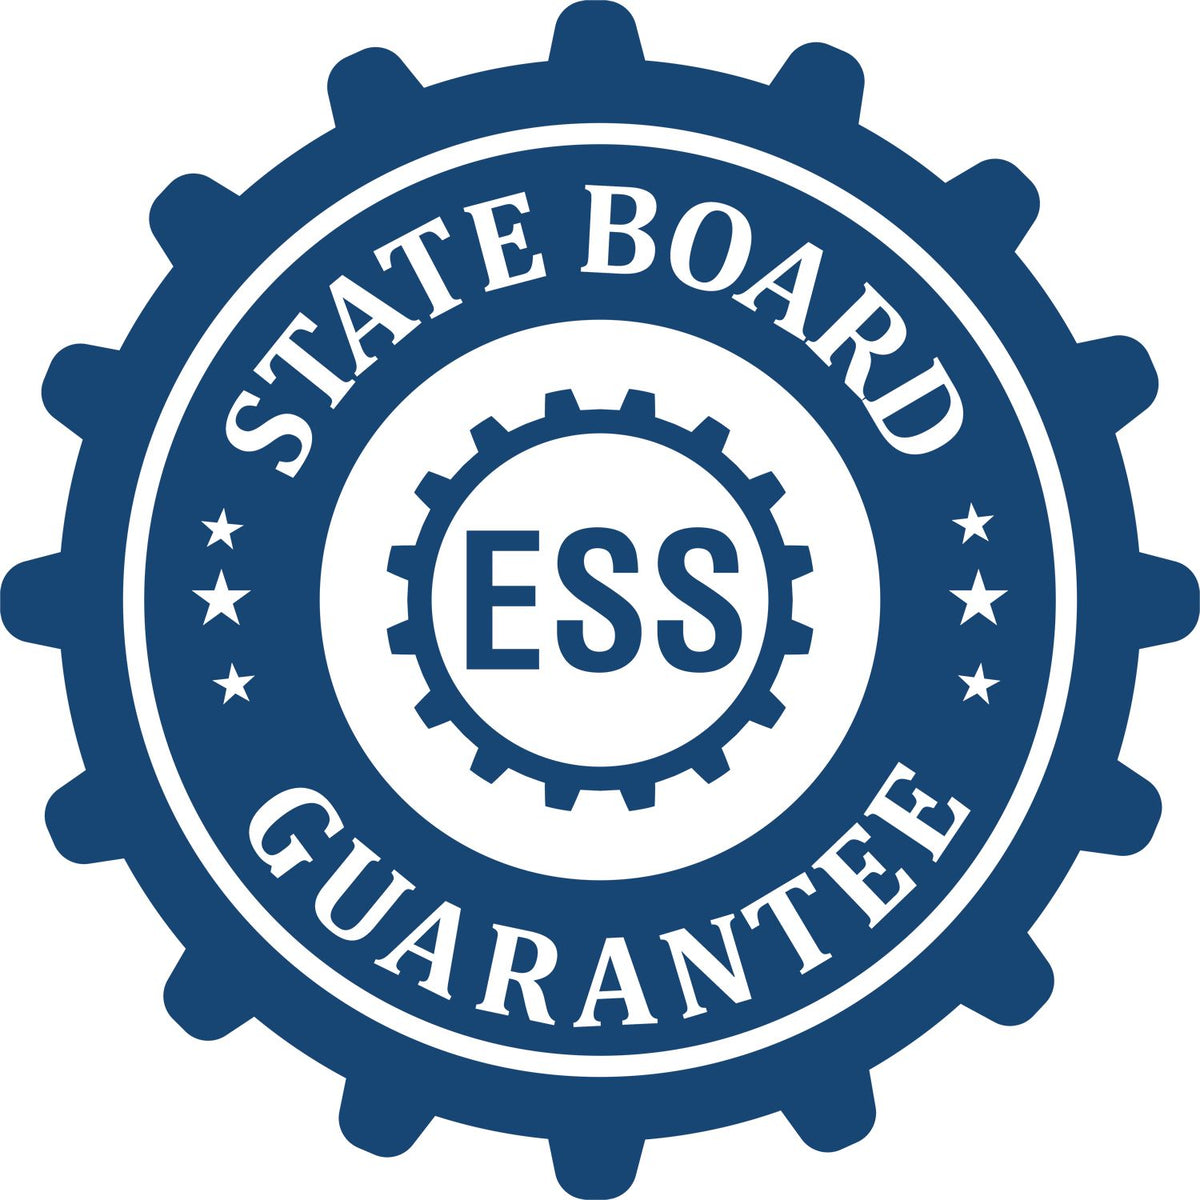 An emblem in a gear shape illustrating a state board guarantee for the Hybrid Michigan Architect Seal